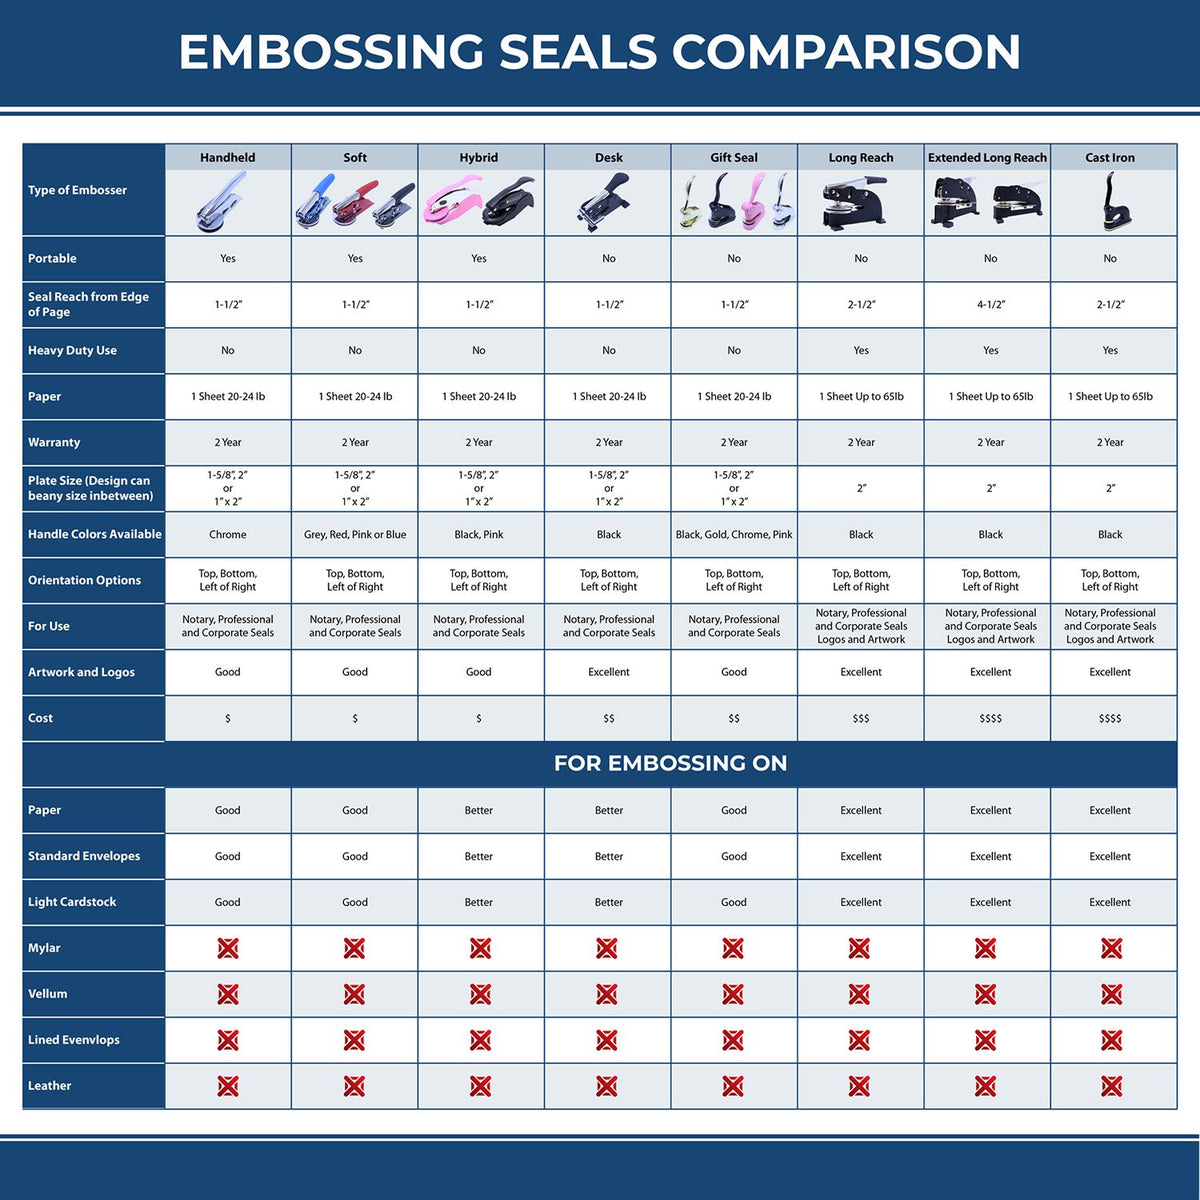 A comparison chart for the different types of mount models available for the Gift Maine Engineer Seal